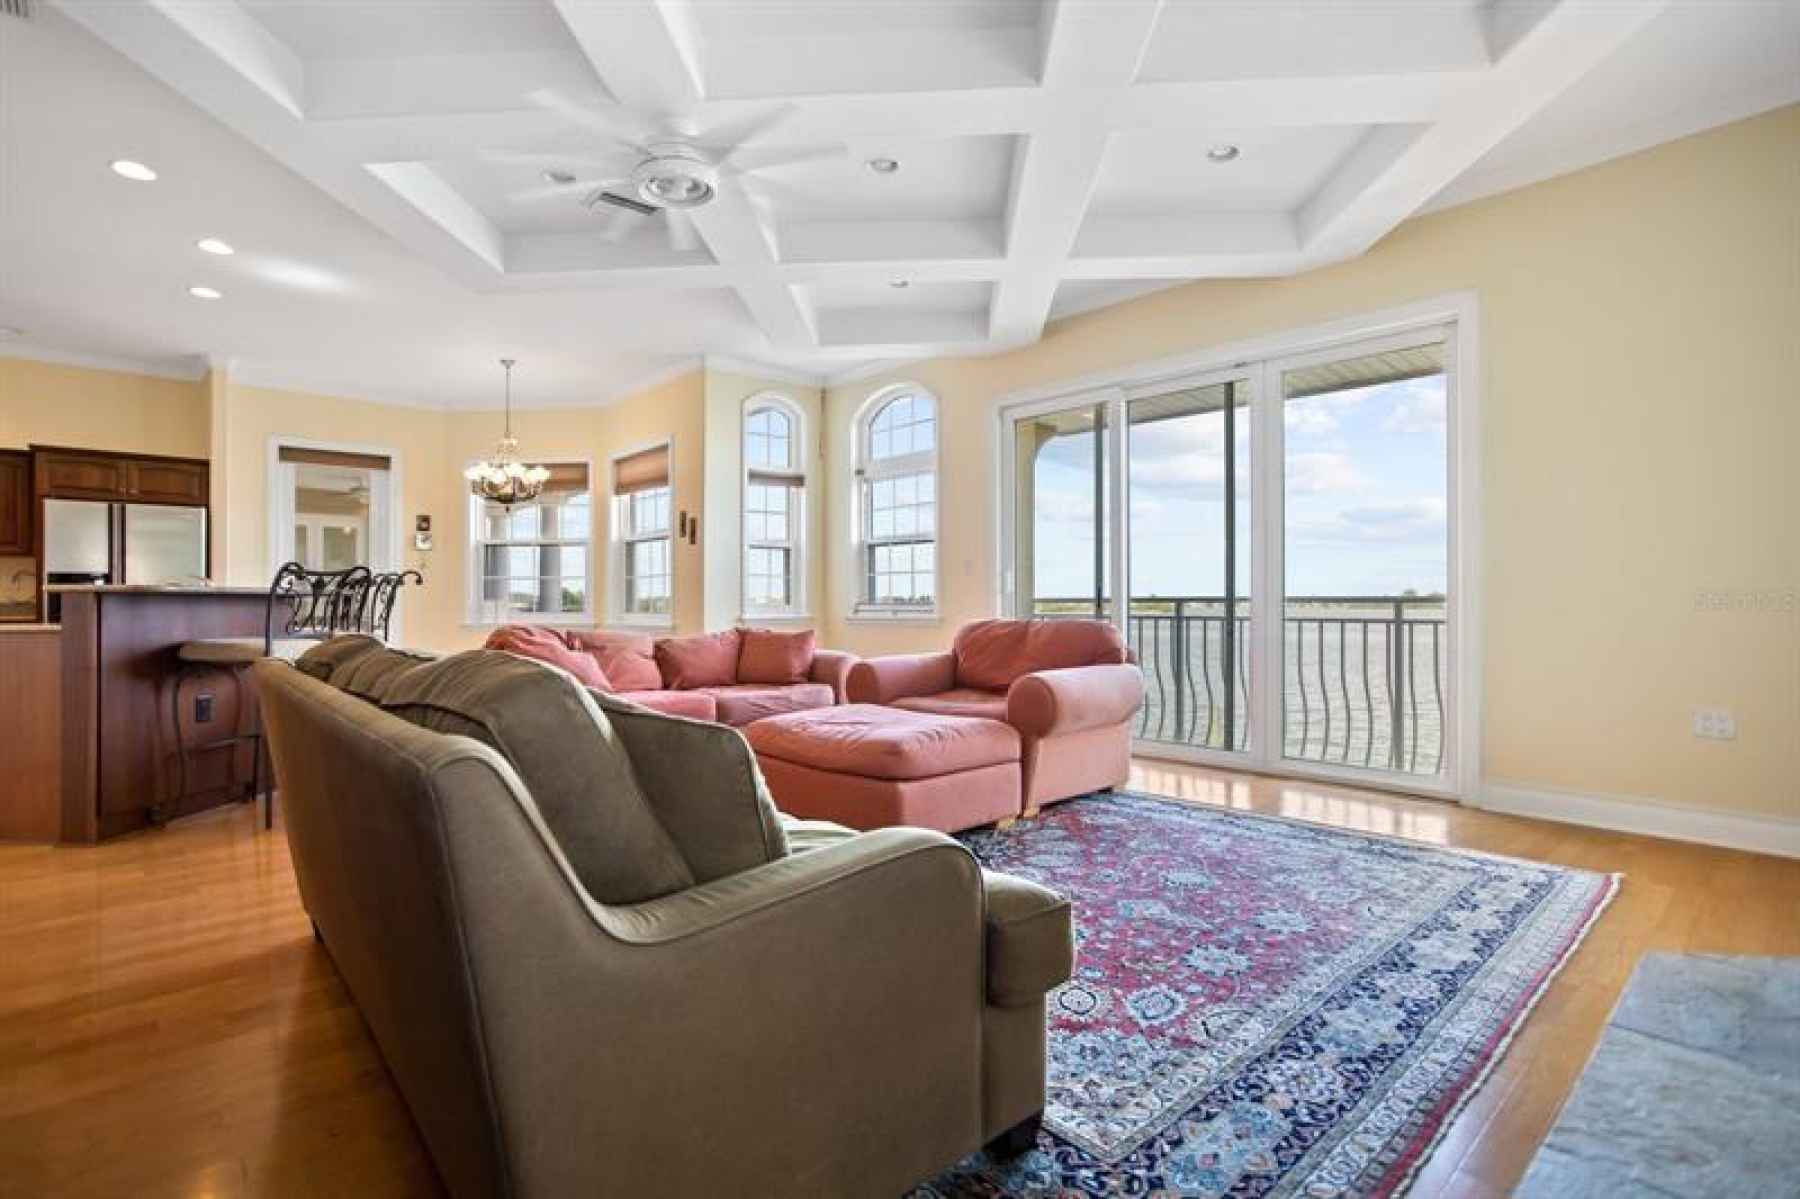 Great room offers Trey ceiling with recessed lighting and gas fireplace